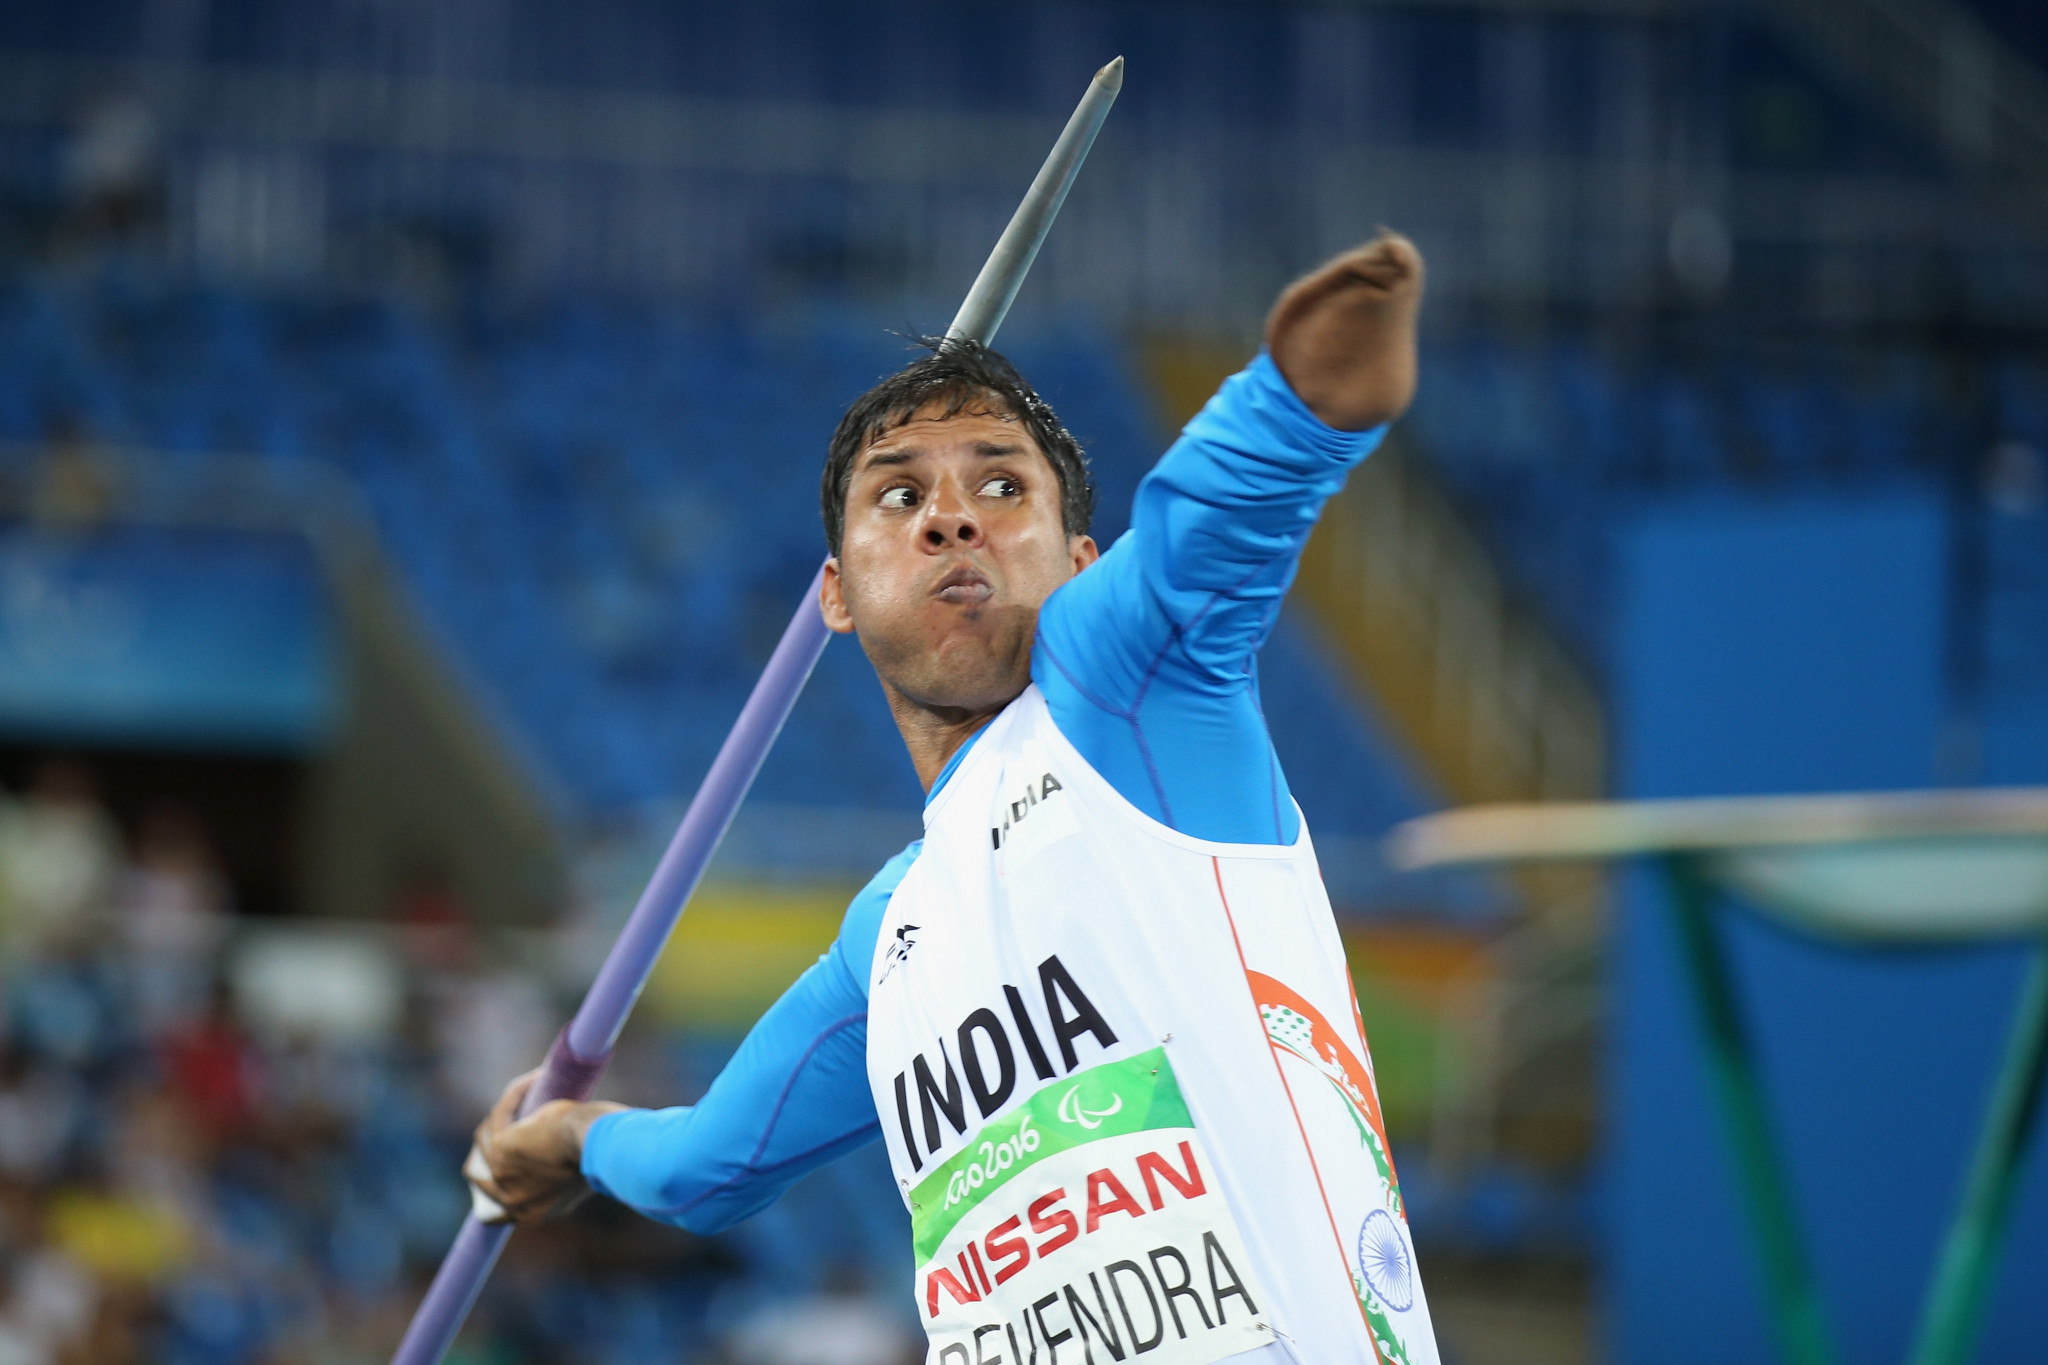 The Paralympic Committee of India has partnered with SIDBI ©Getty Images